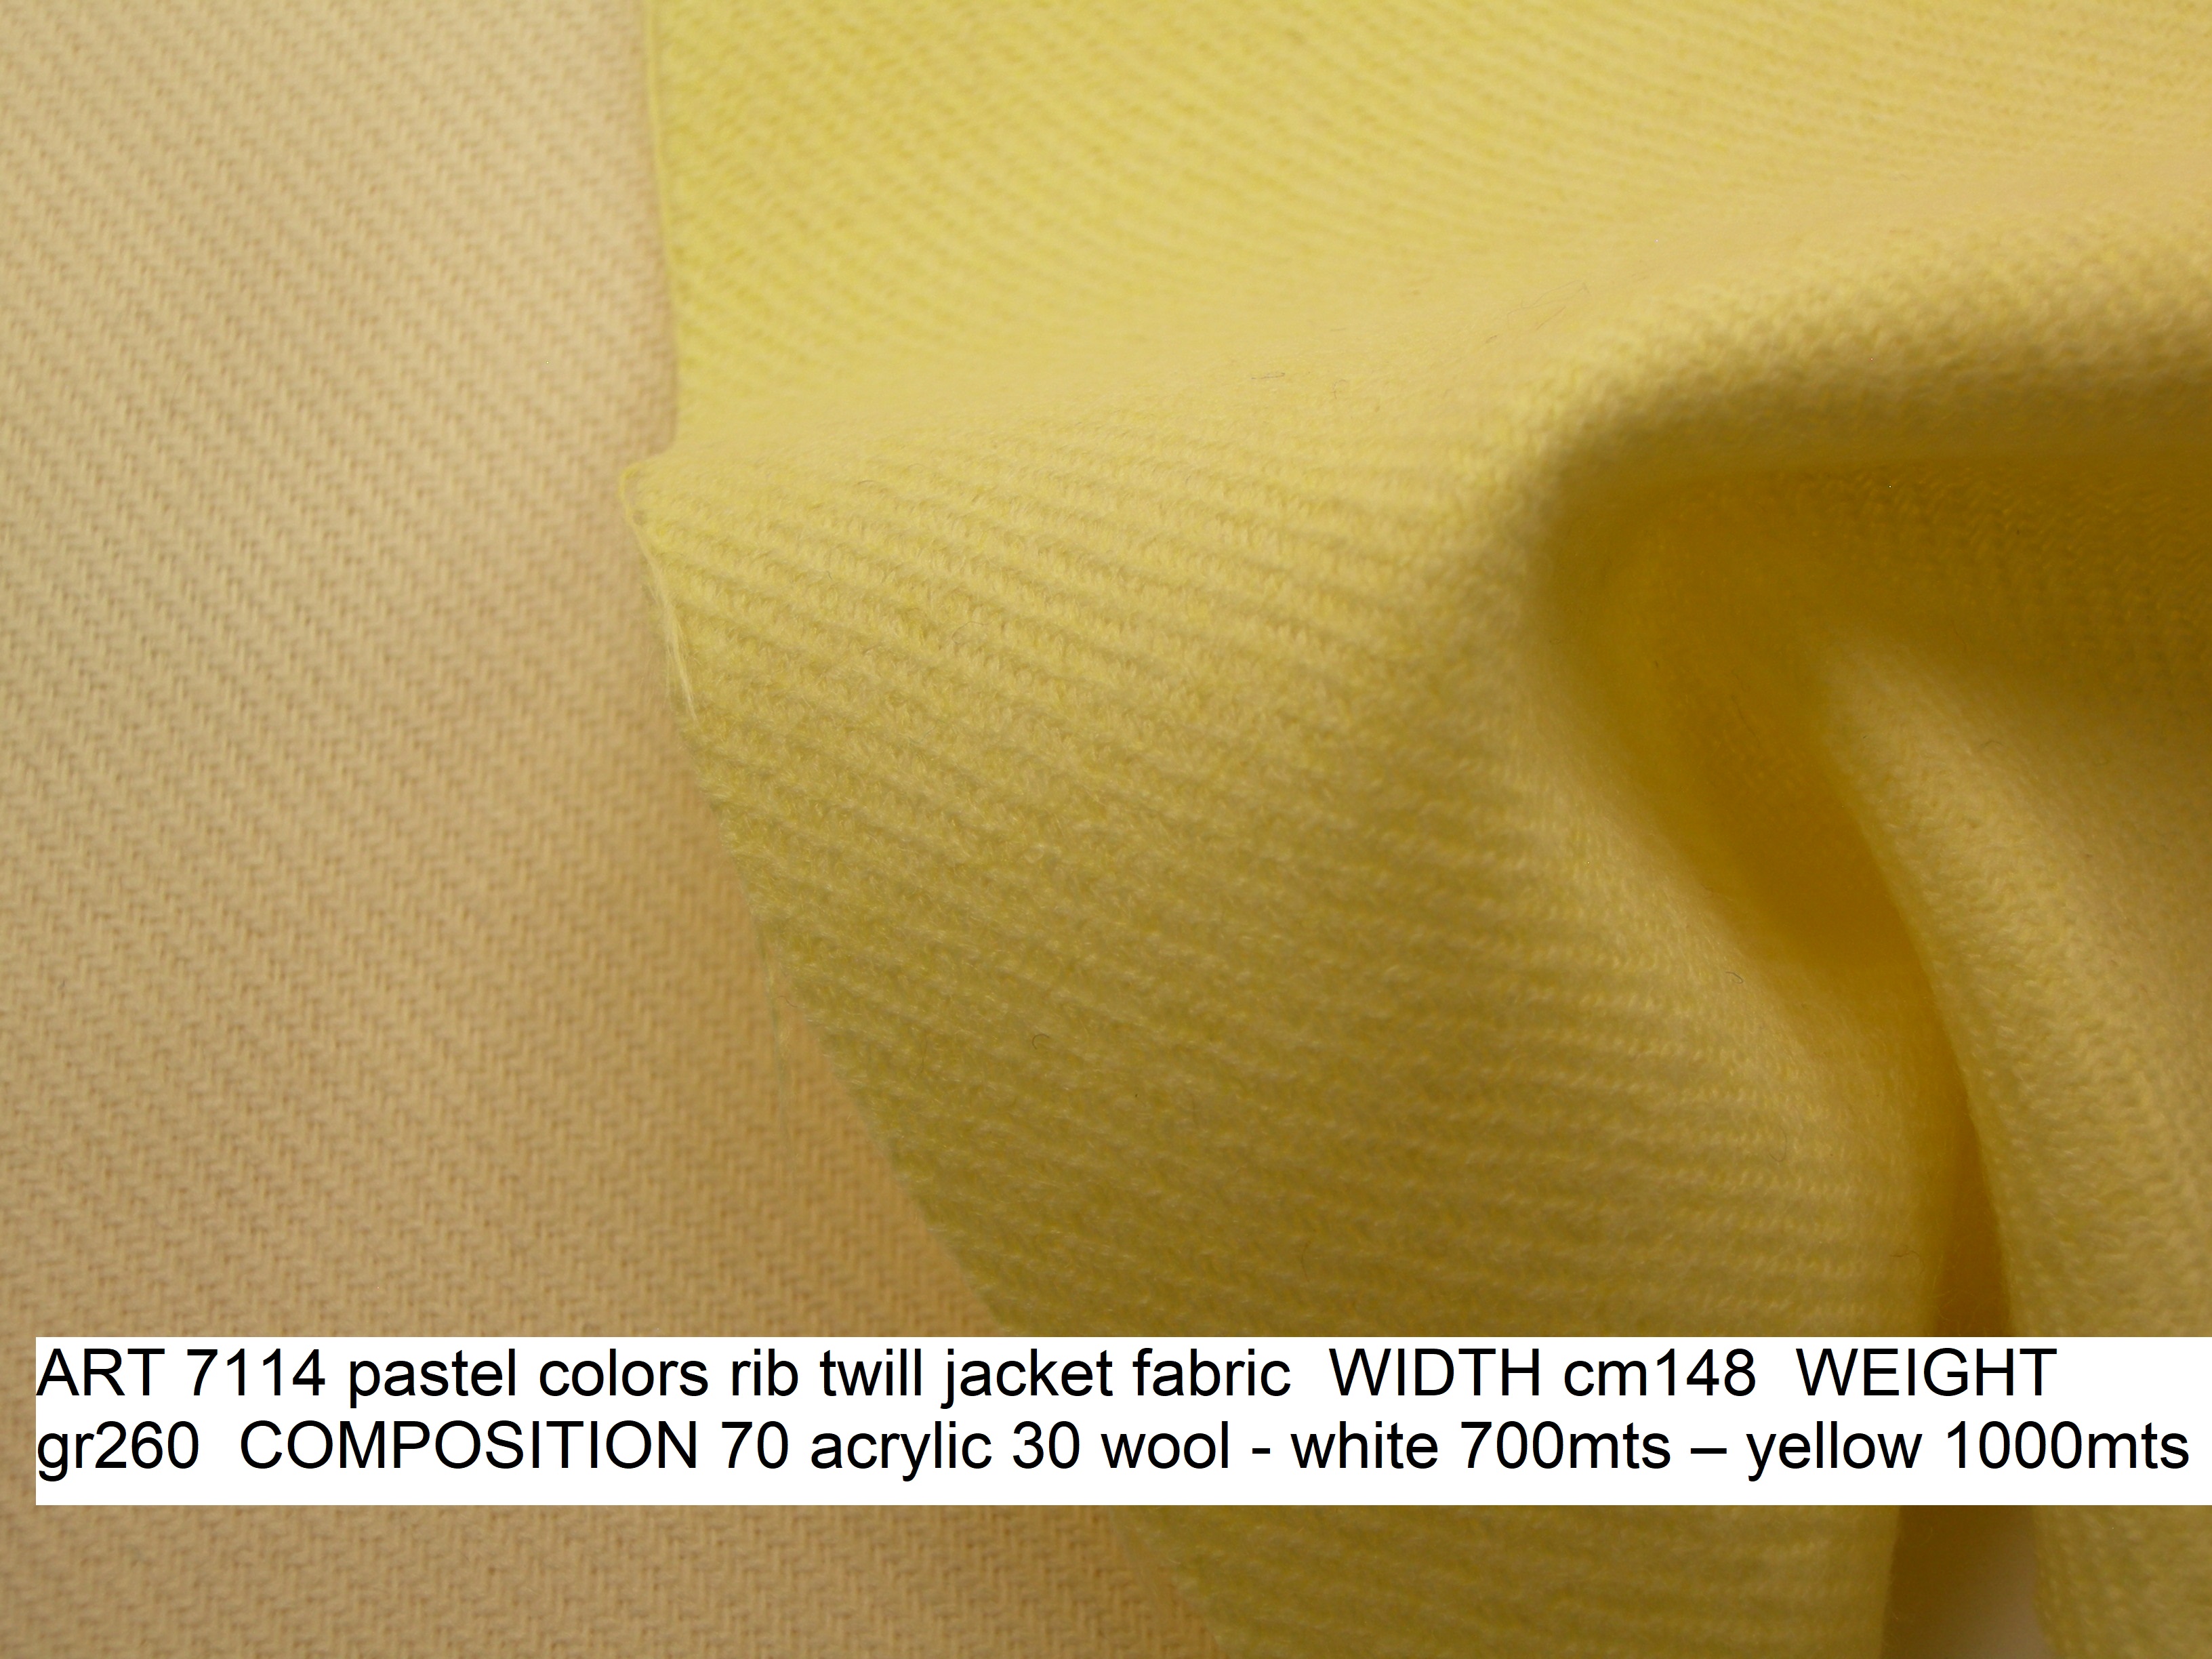 ART 7114 pastel colors rib twill jacket fabric WIDTH cm148 WEIGHT gr260 COMPOSITION 70 acrylic 30 wool - white 700mts – yellow 1000mts